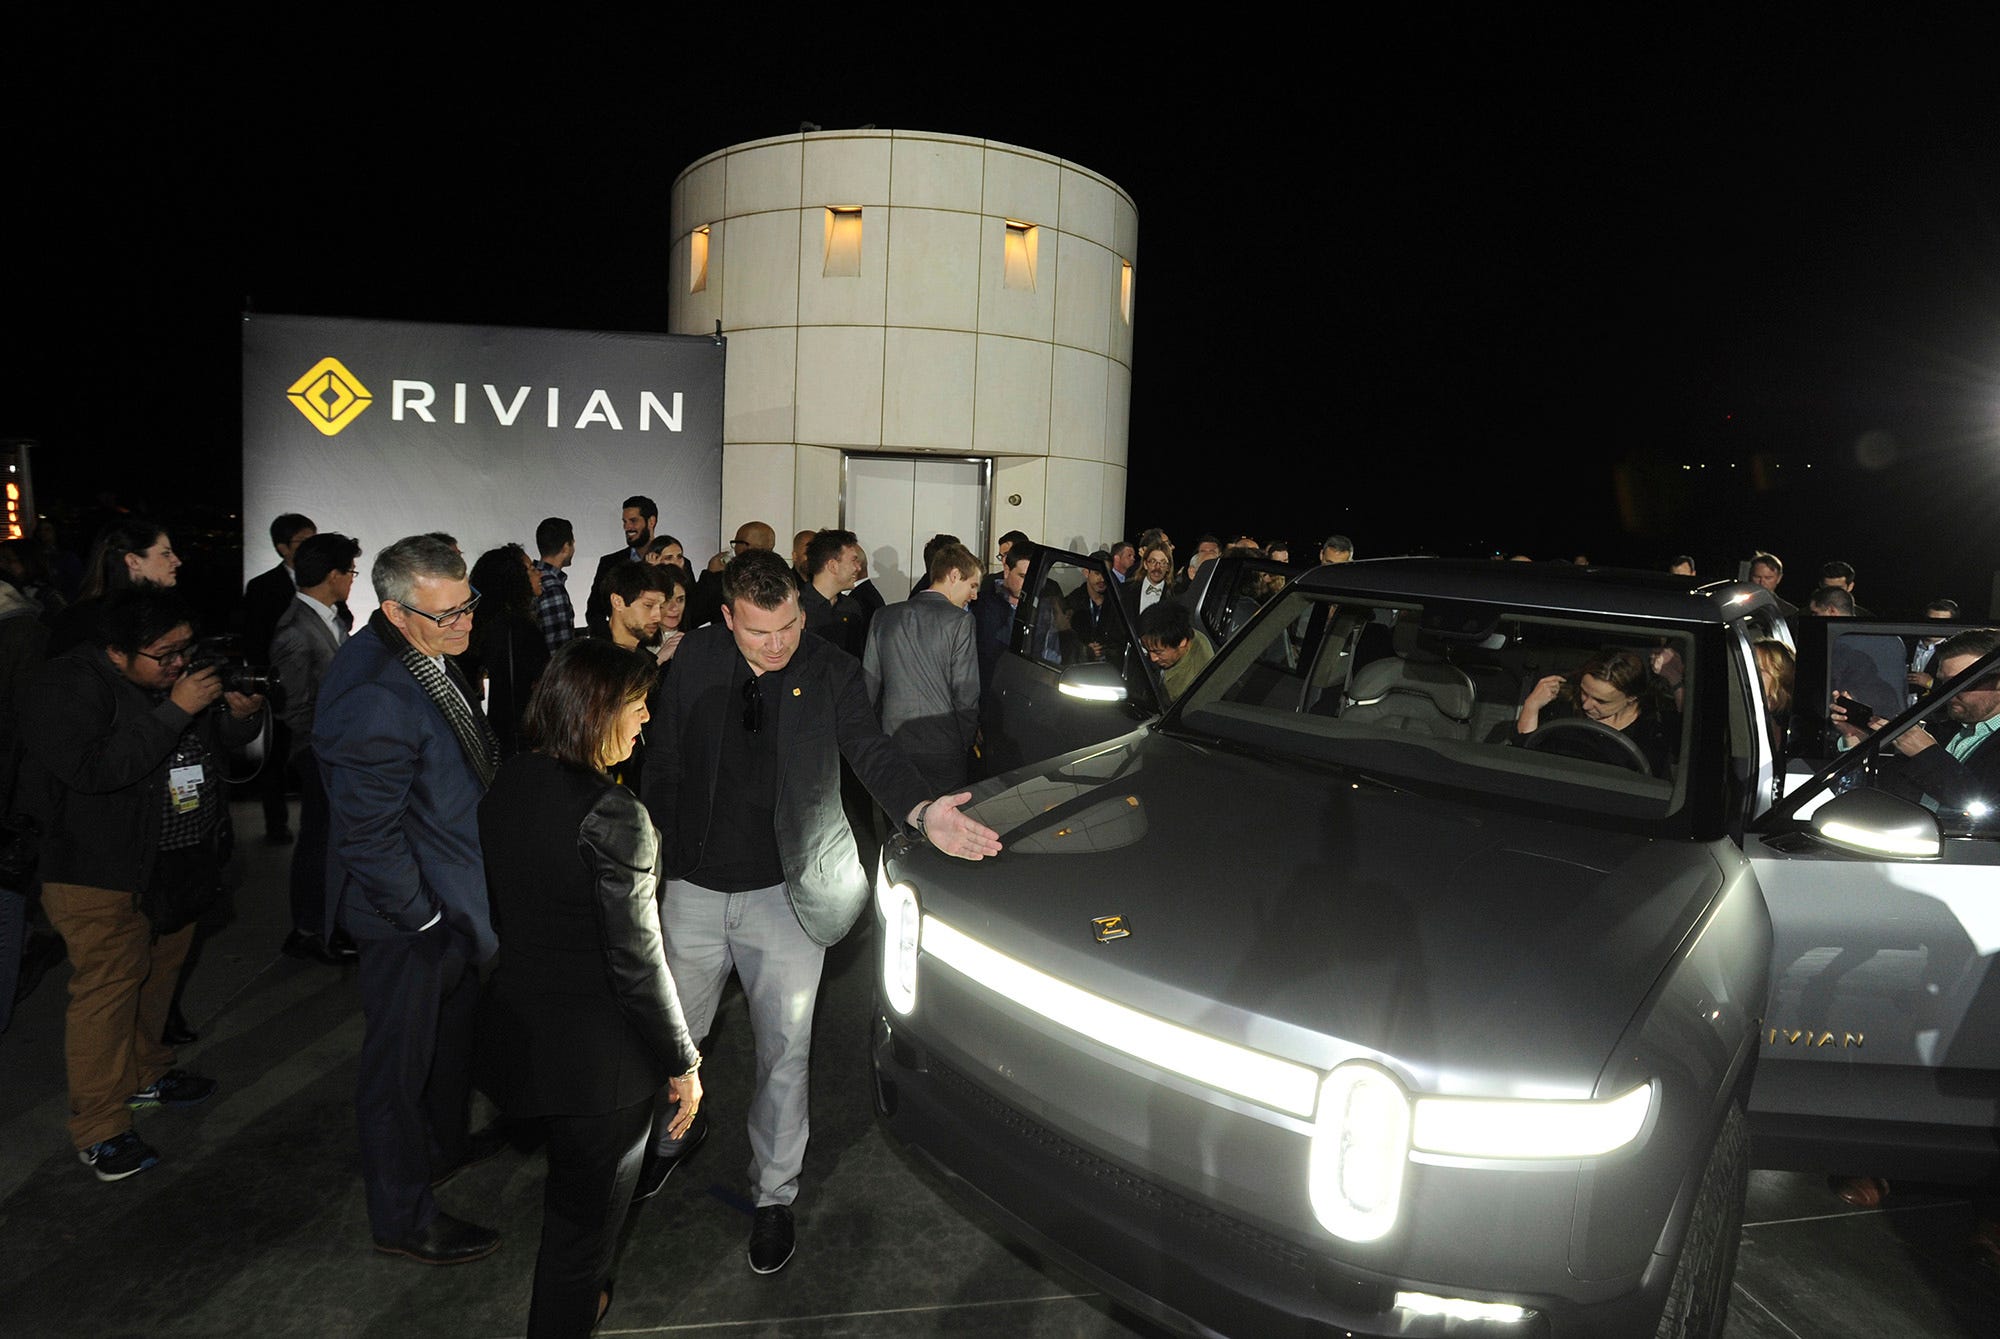 Rivian unveils the first-ever electric adventure vehicle at Griffith Observatory on Monday, Nov. 26, 2018 in Los Angeles.